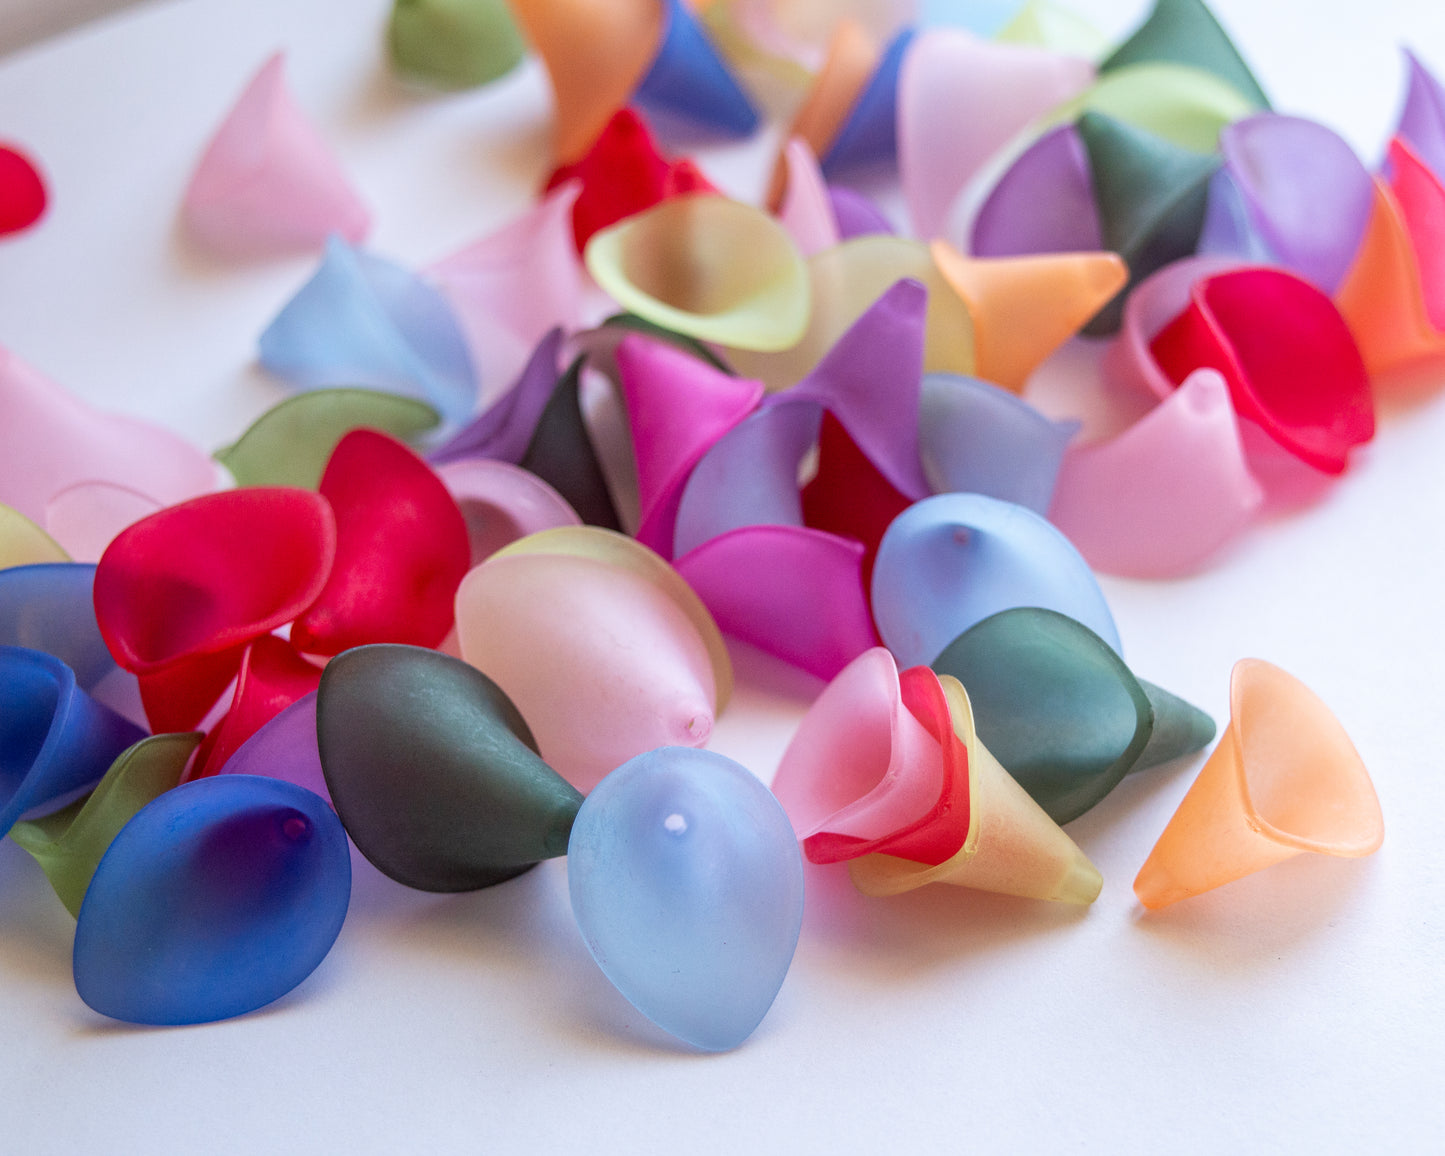 20x25mm Calla Lily Beads in Colorful Frosted Acrylic